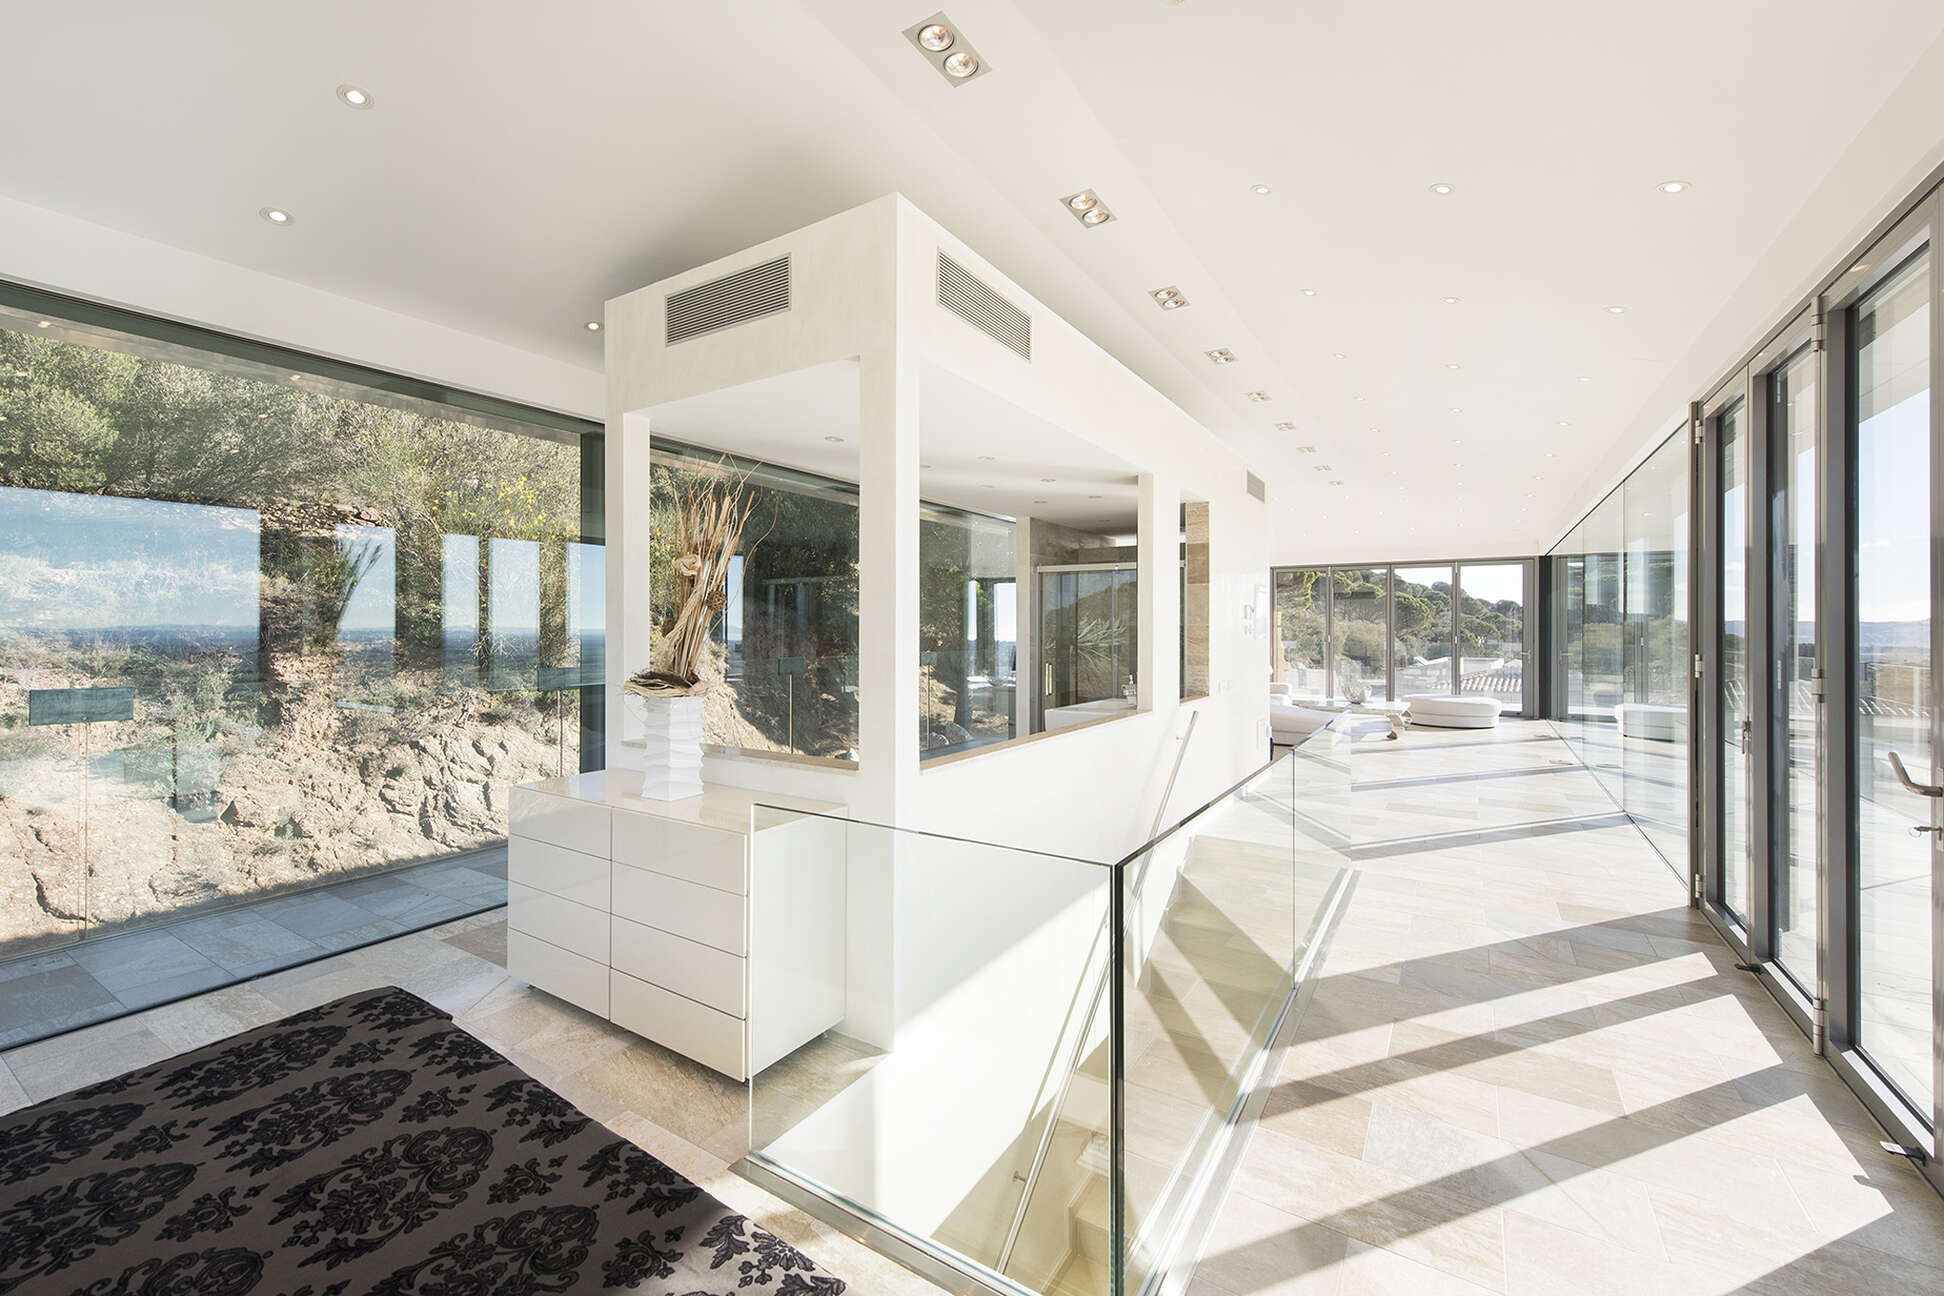 Spectacular luxury villa overlooking the Bay of Roses for sale, Pau